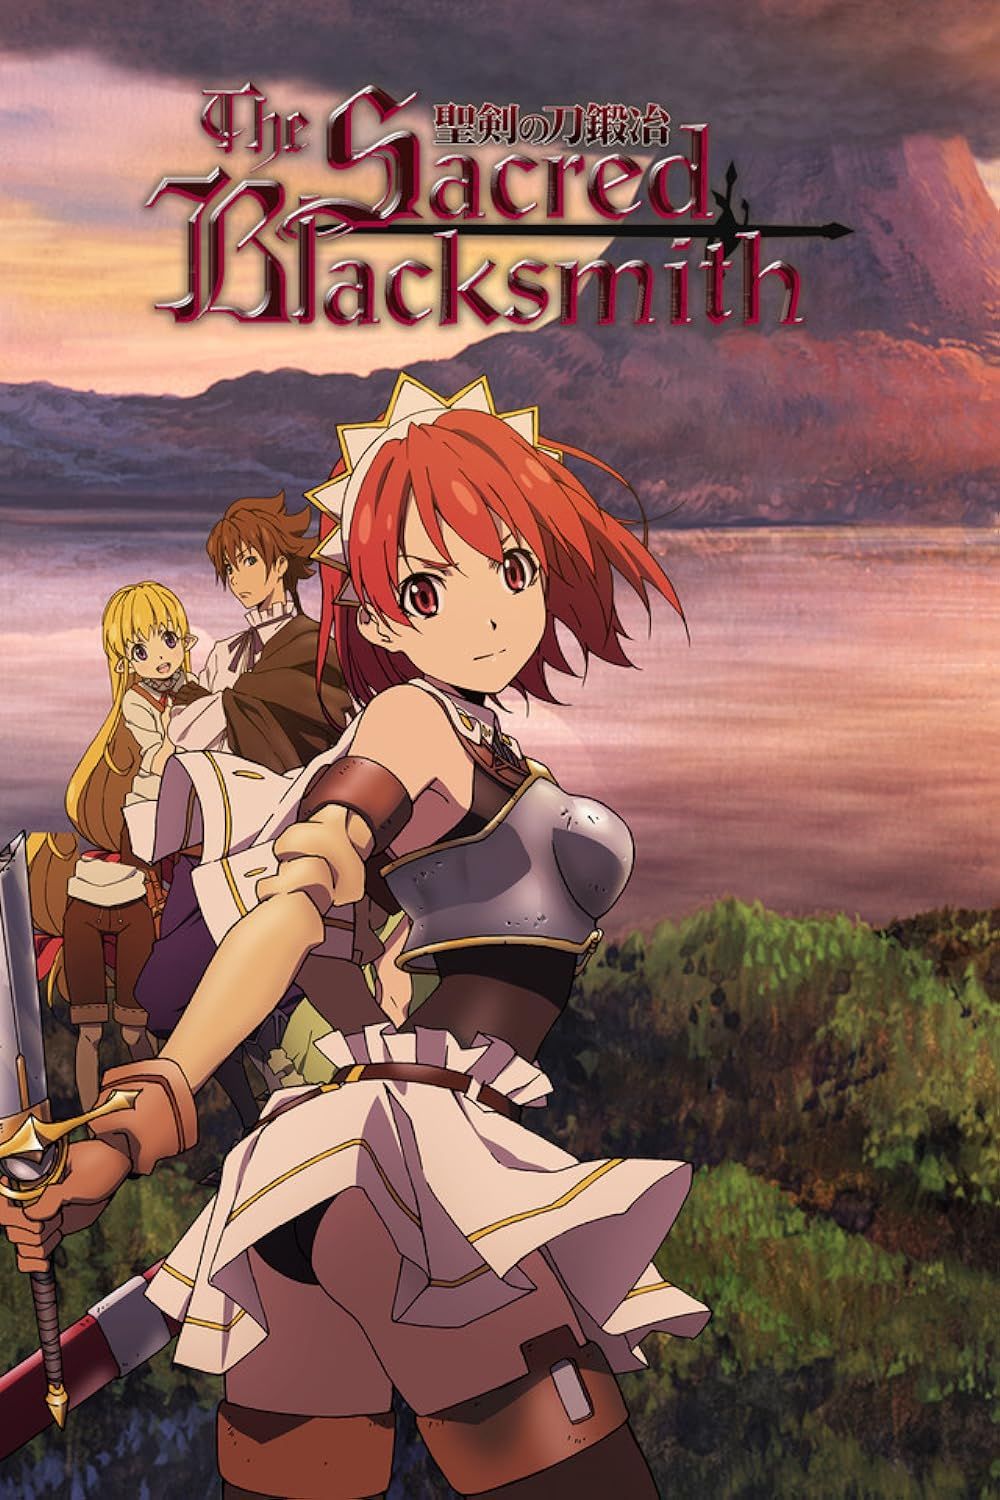 The 3 main characters in the Anime: The Sacred Blacksmith (2009)